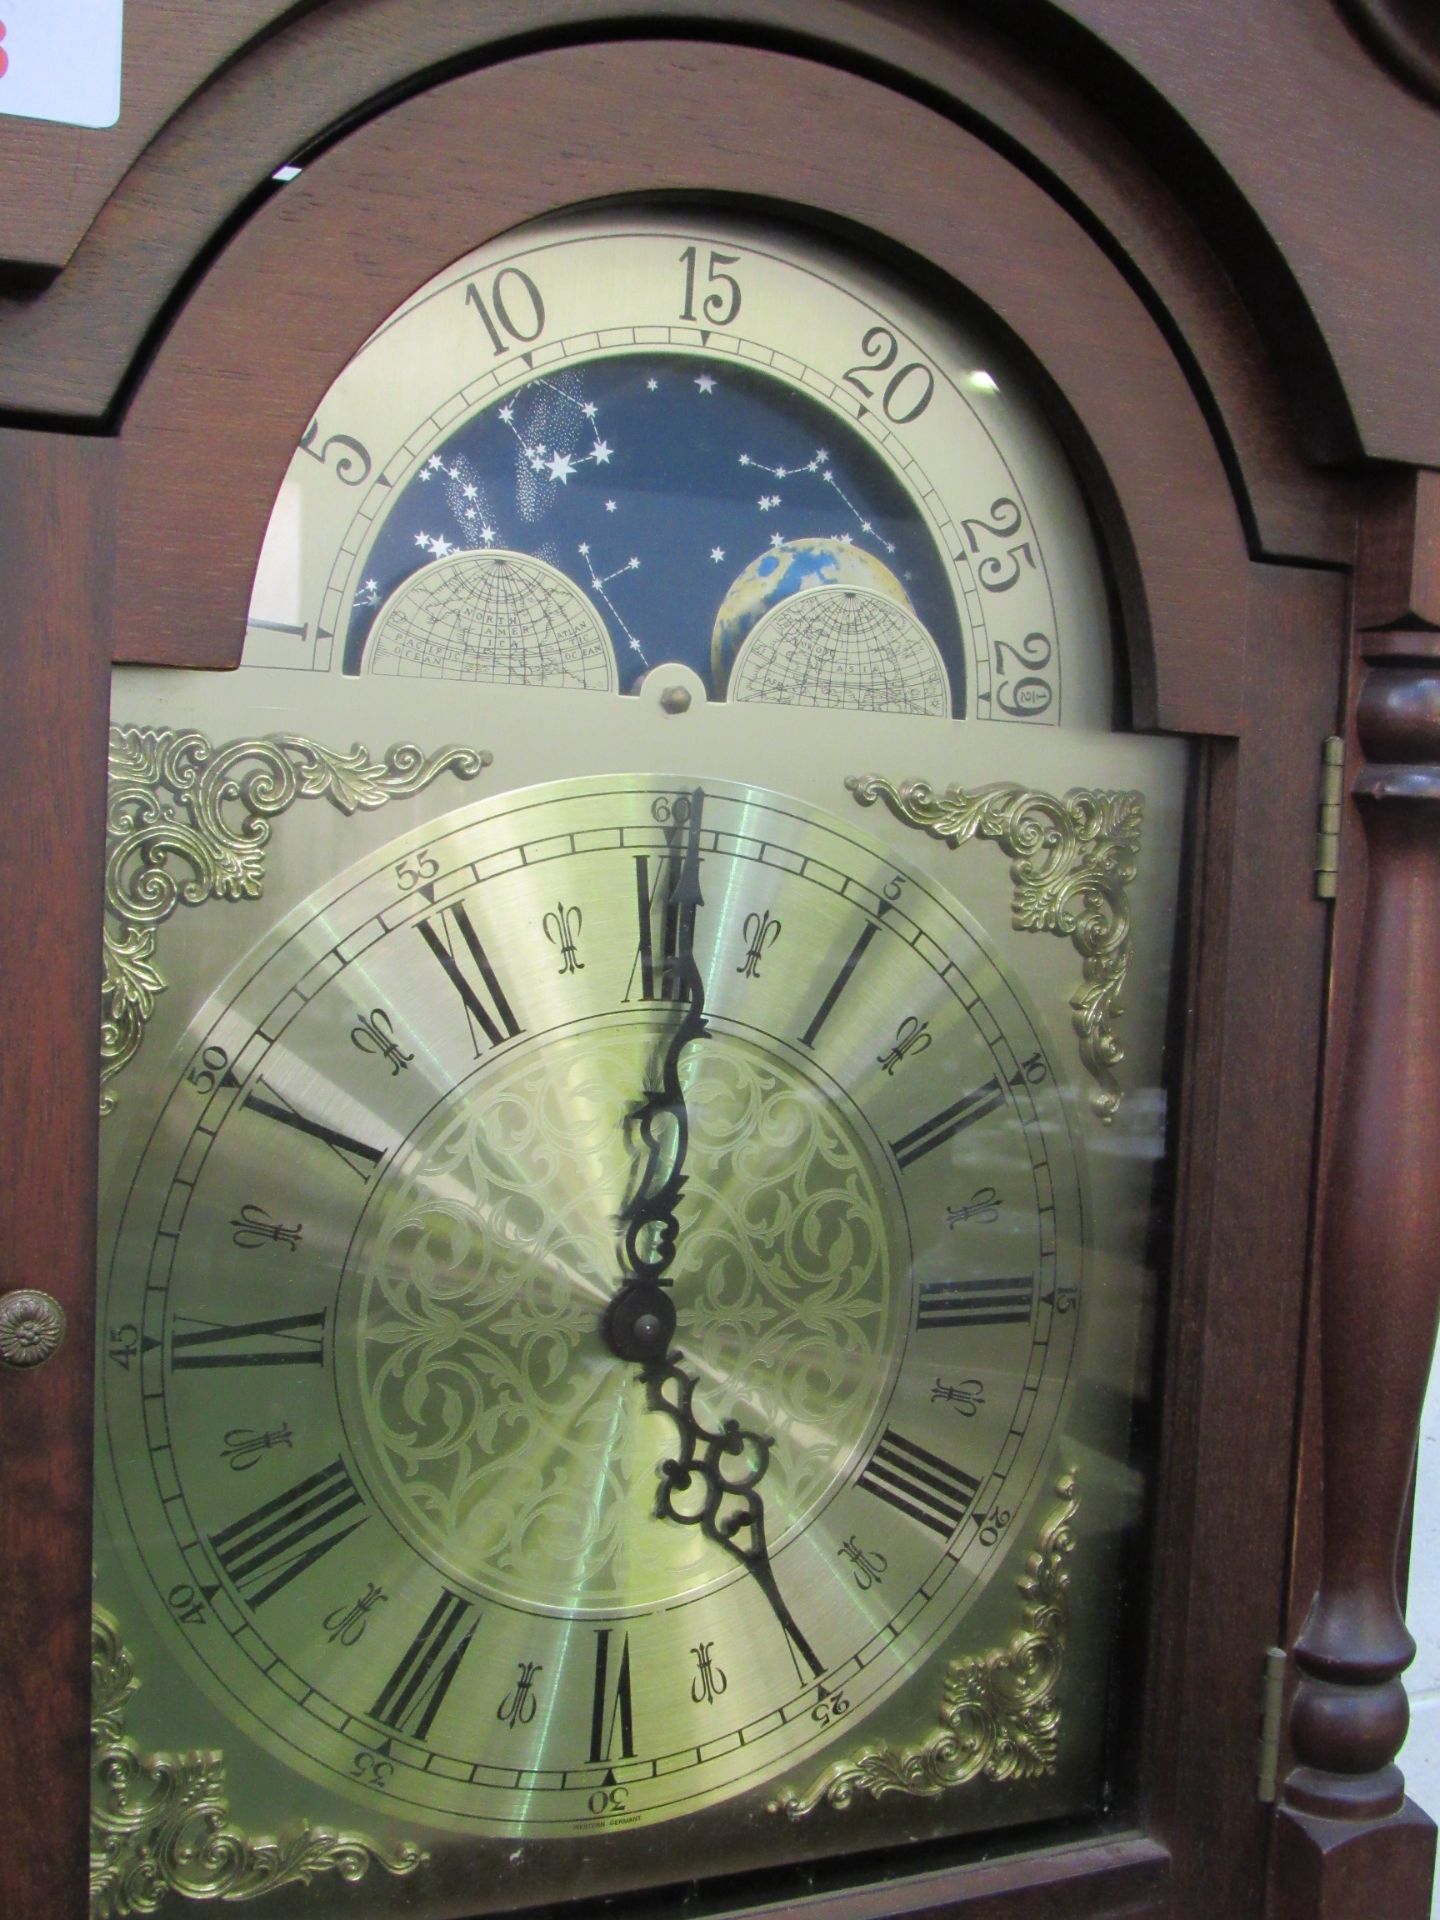 Denclock by Scan Clock Export in Denmark. Moon phase longcase clock with brass face and glass - Image 3 of 3